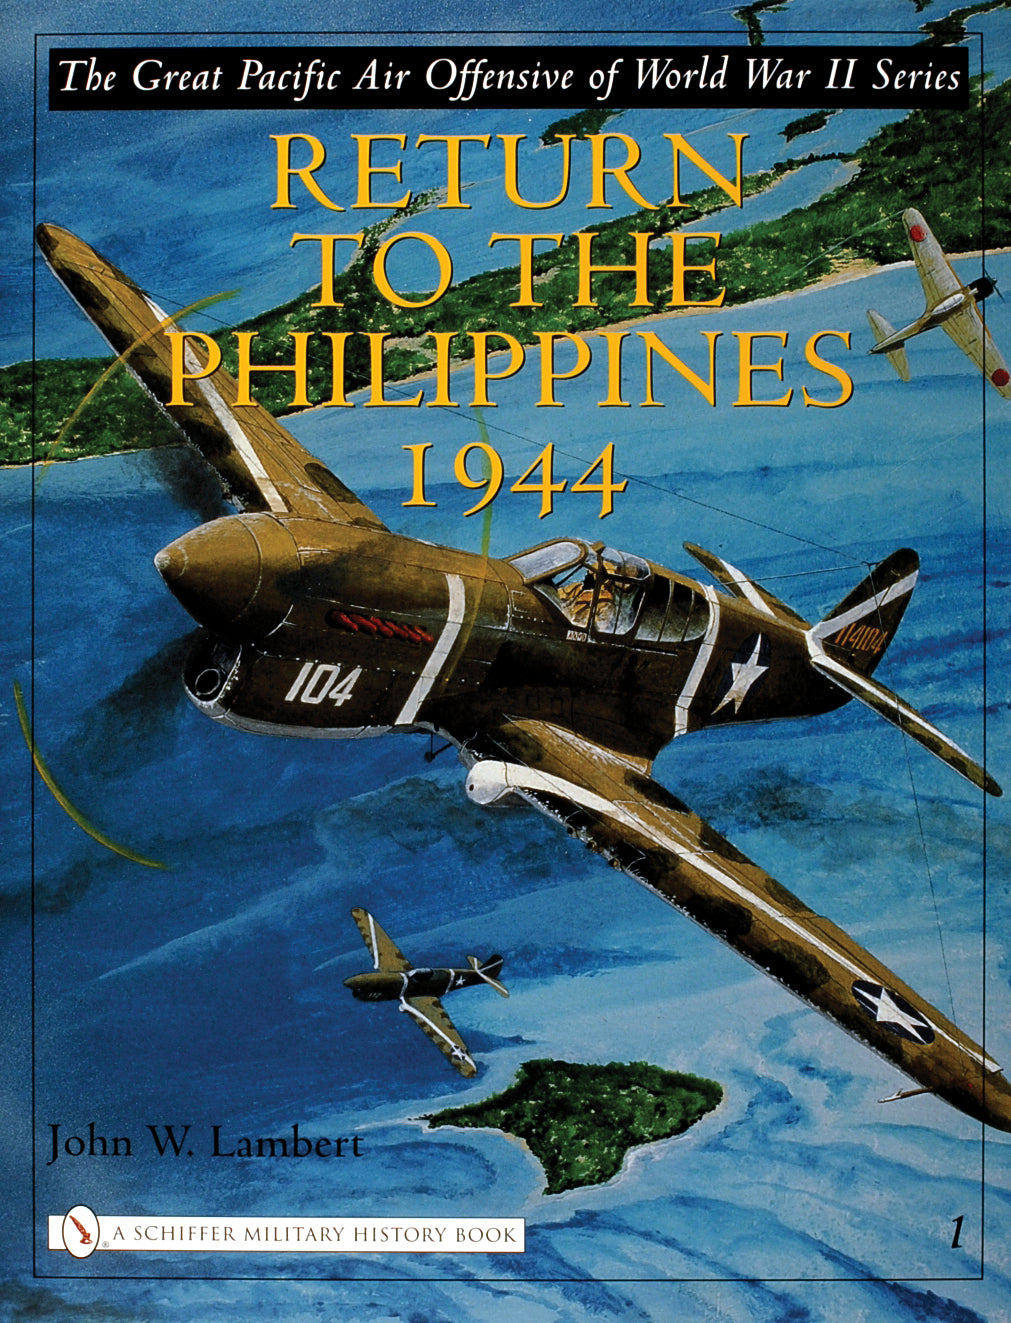 The Great Pacific Air Offensive of World War II